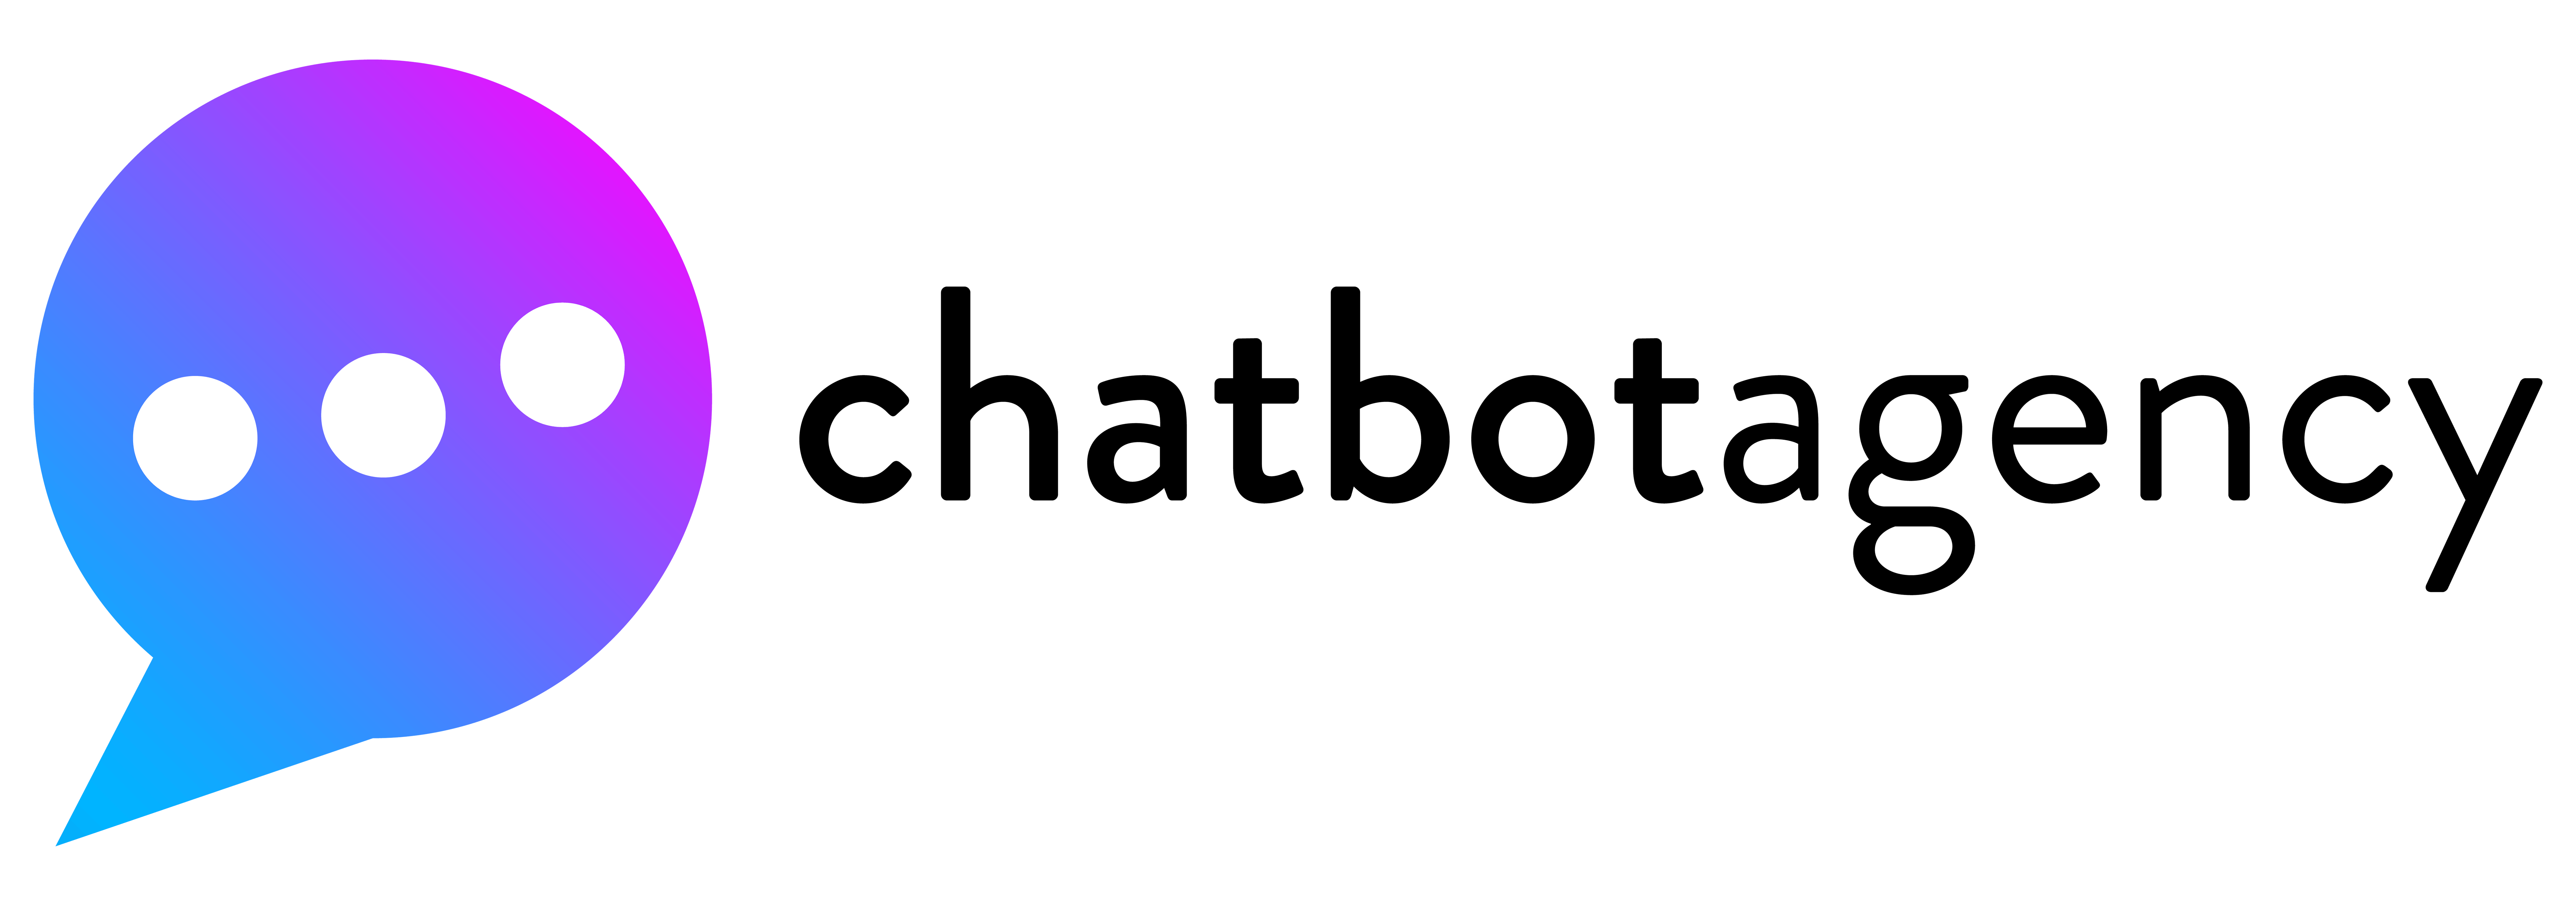 Get In Touch | Chatbot Agency | Brisbane